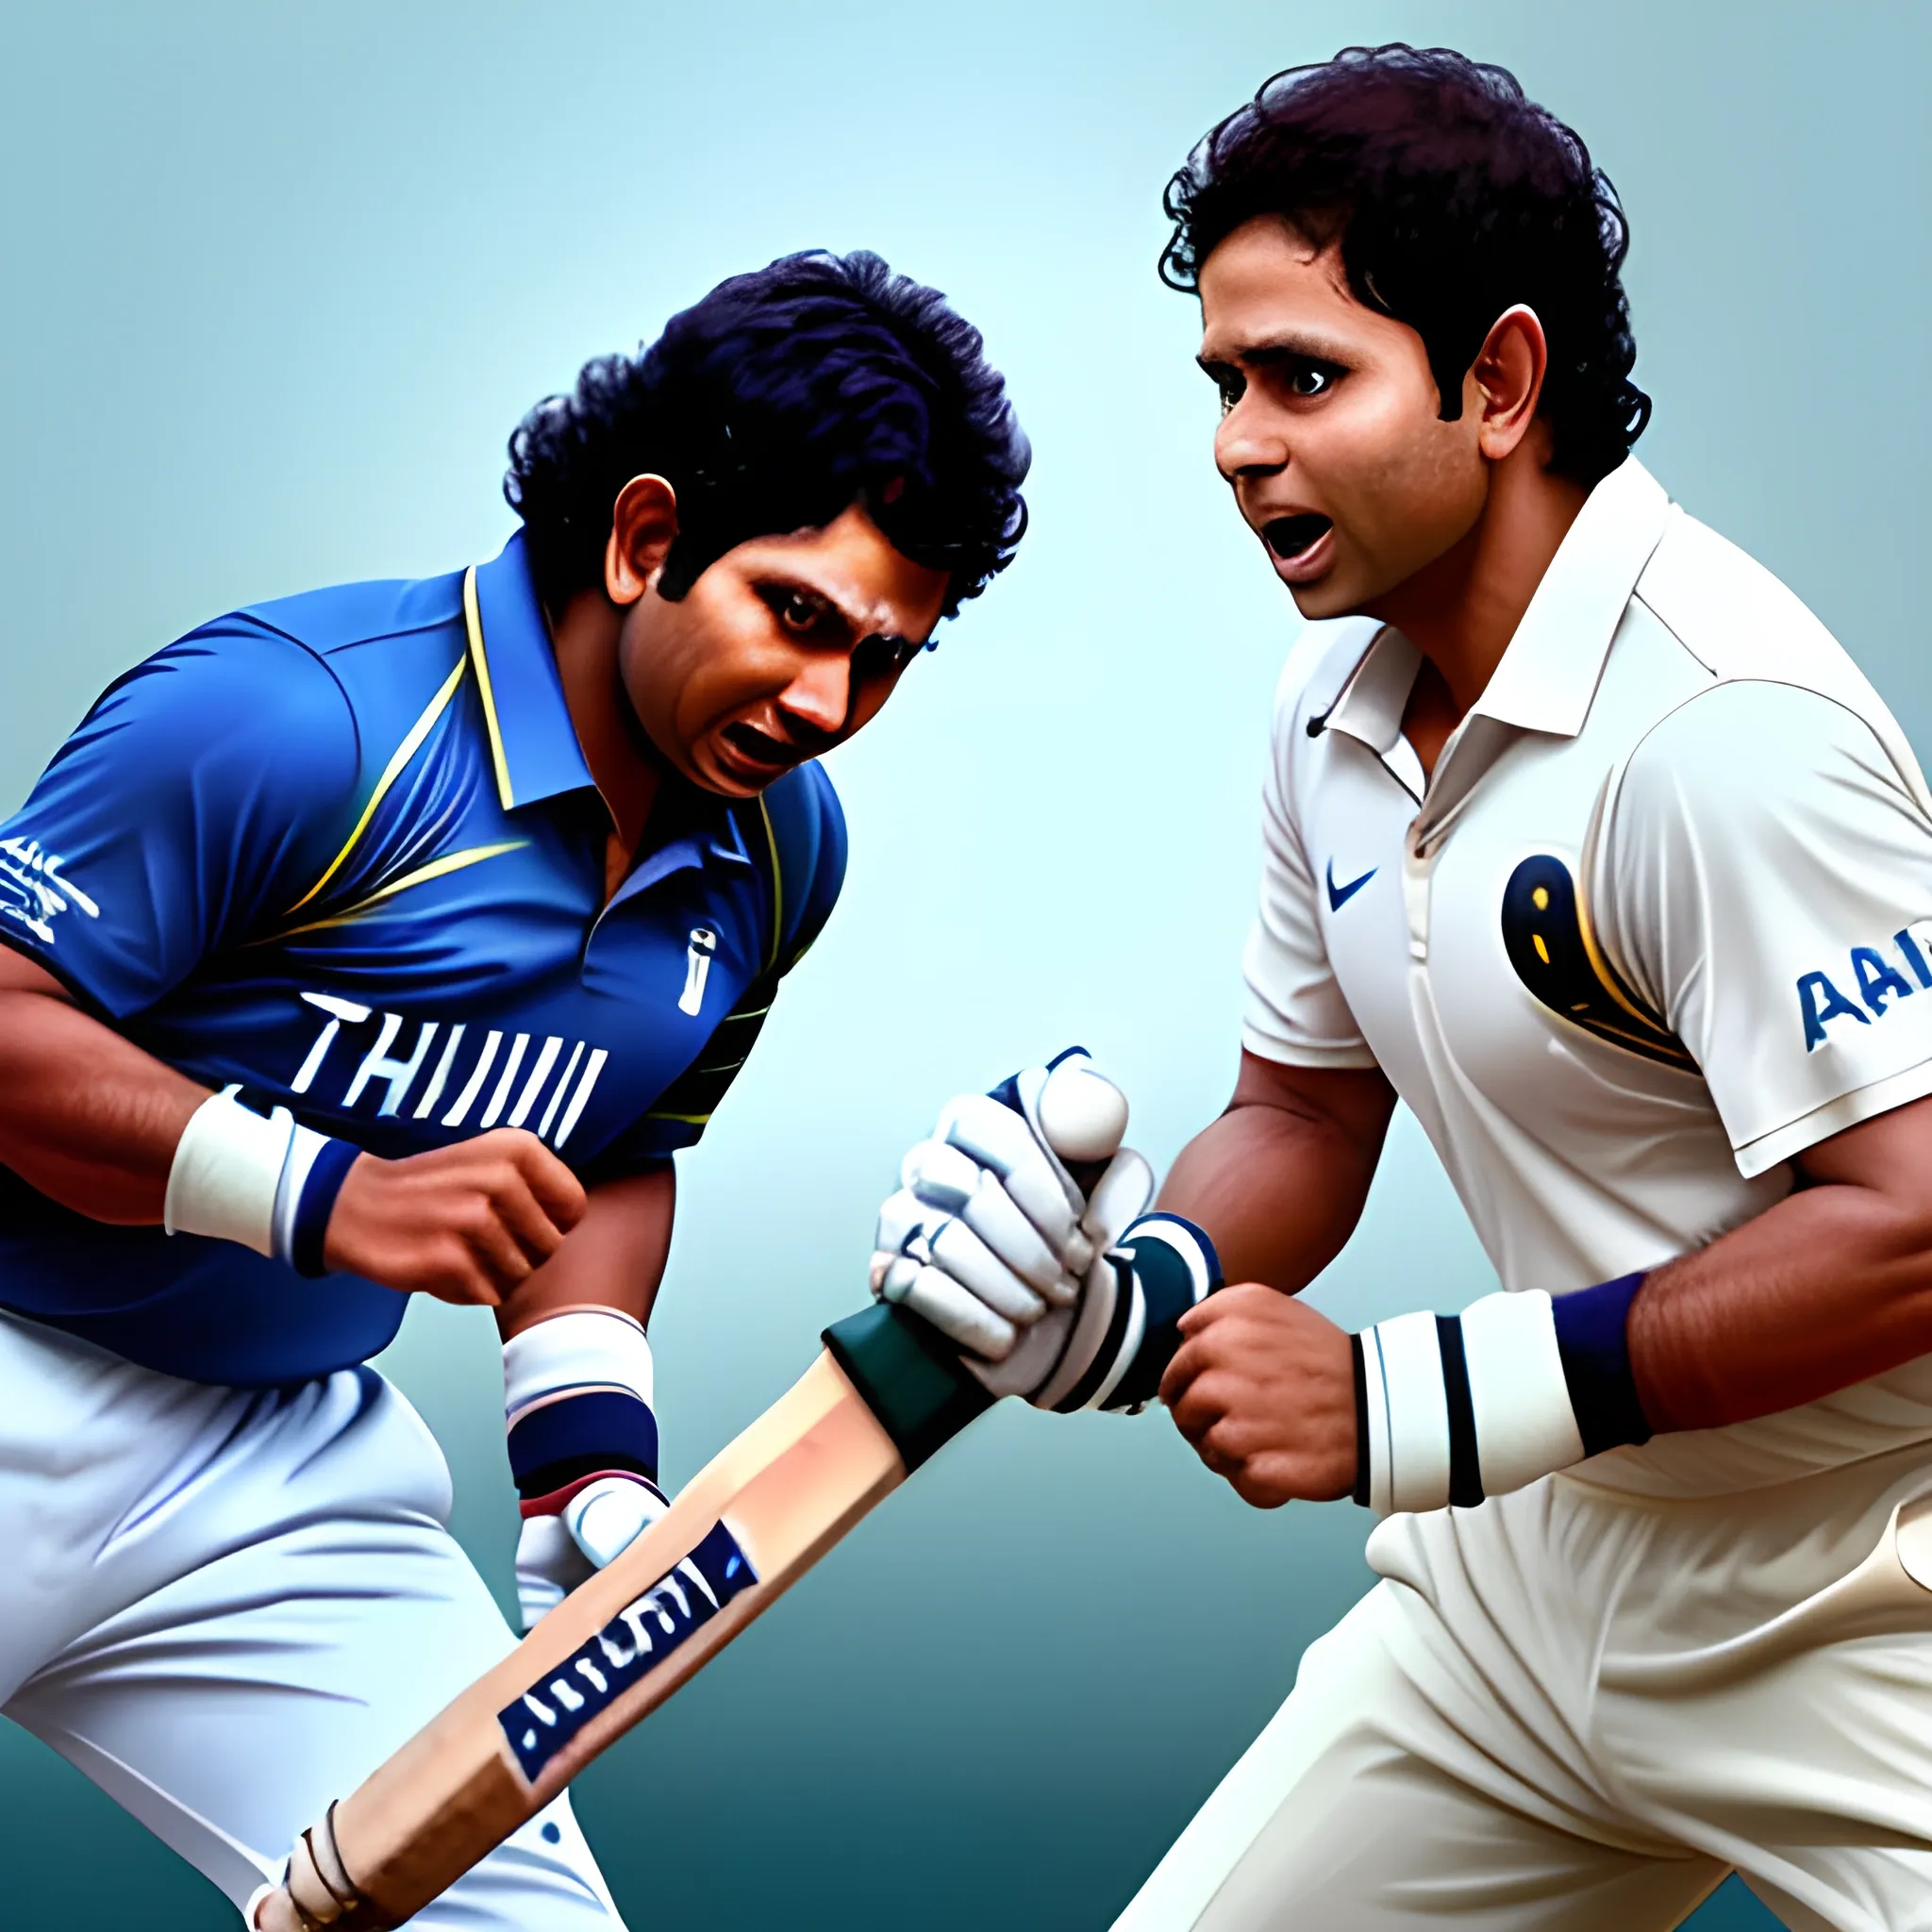 a photo of ((Sachin Tendulkar)) and ((Rahul Dravid)) fighting with each other very badly with their bats in hand, ultra HD, hyper realistic, great face details, ((Saurav Ganguly)) crying very badly in background.